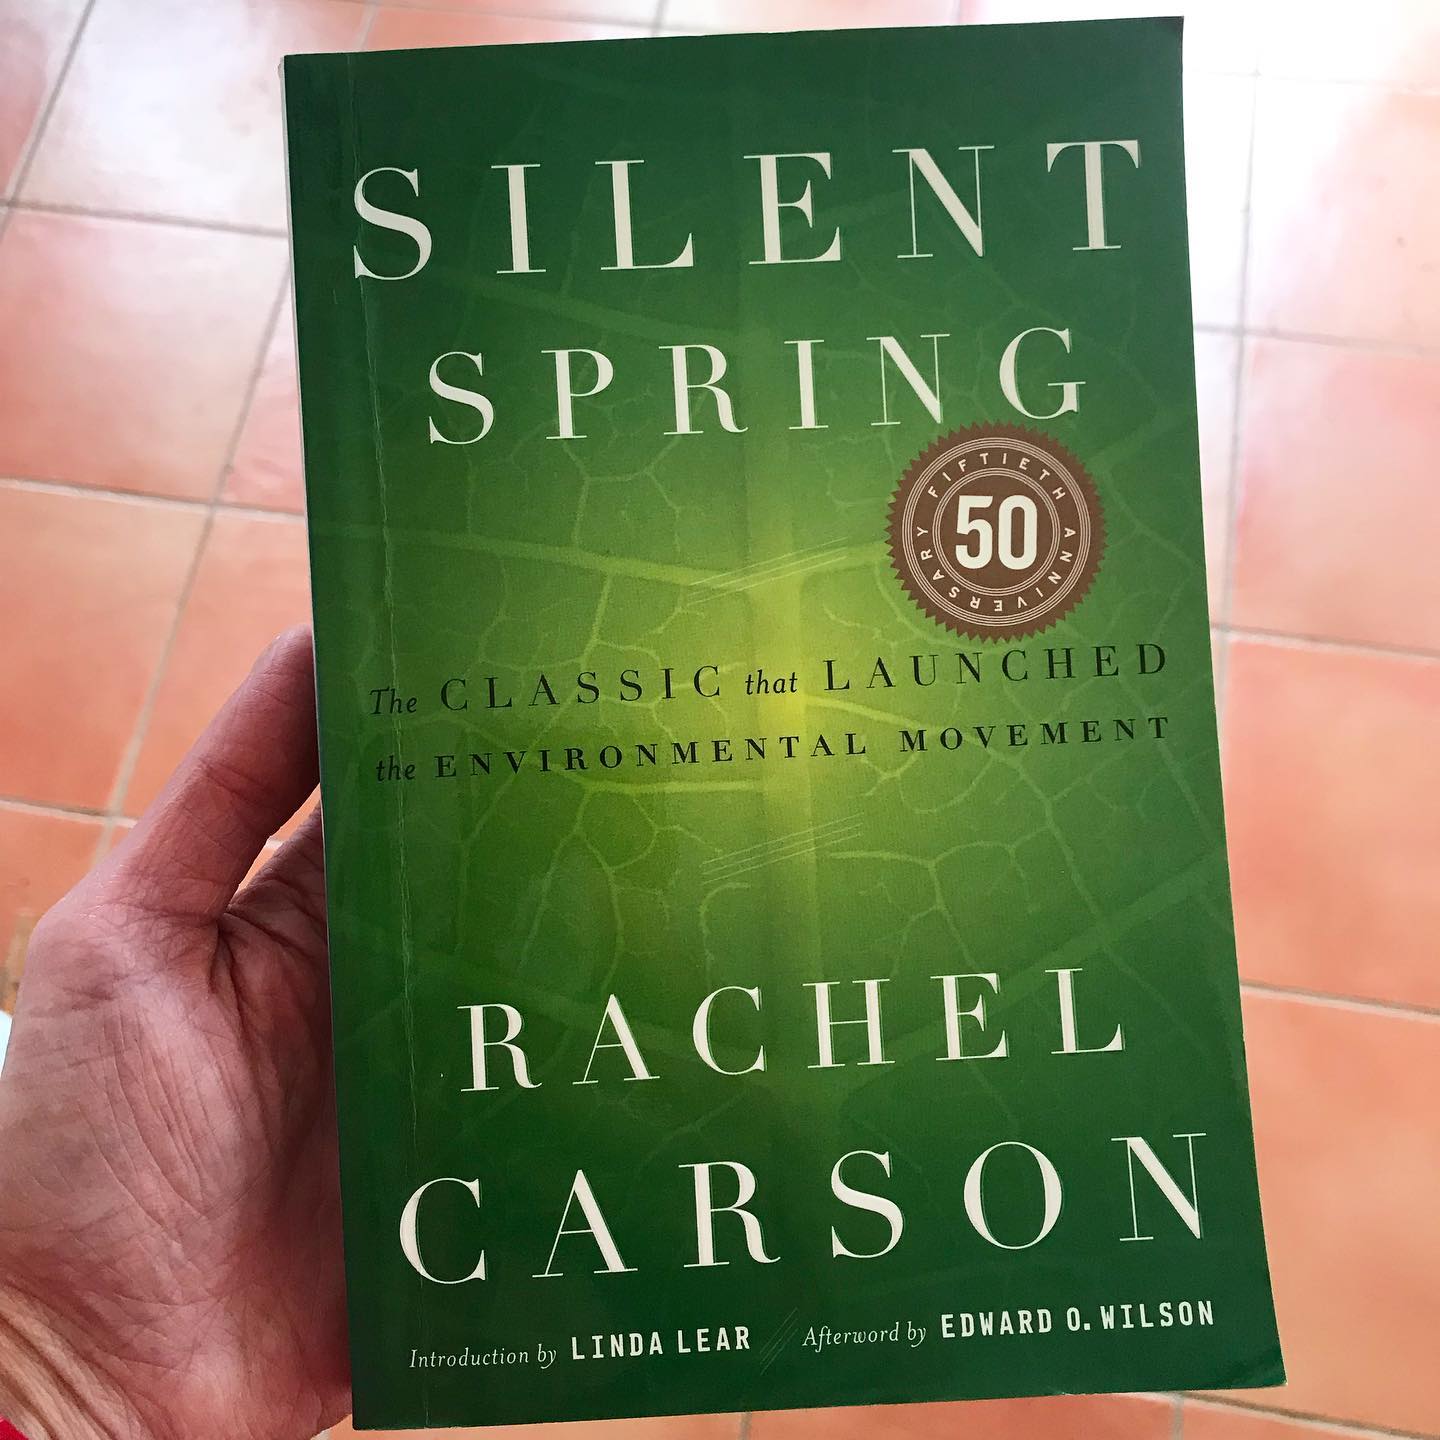 In many ways Rachel Carson was the mother of Earth Day. Her book Silent Spring was published eight years before the first Earth Day in 1970 but it kick started a movement. 
.
.
#earthday #silentspring